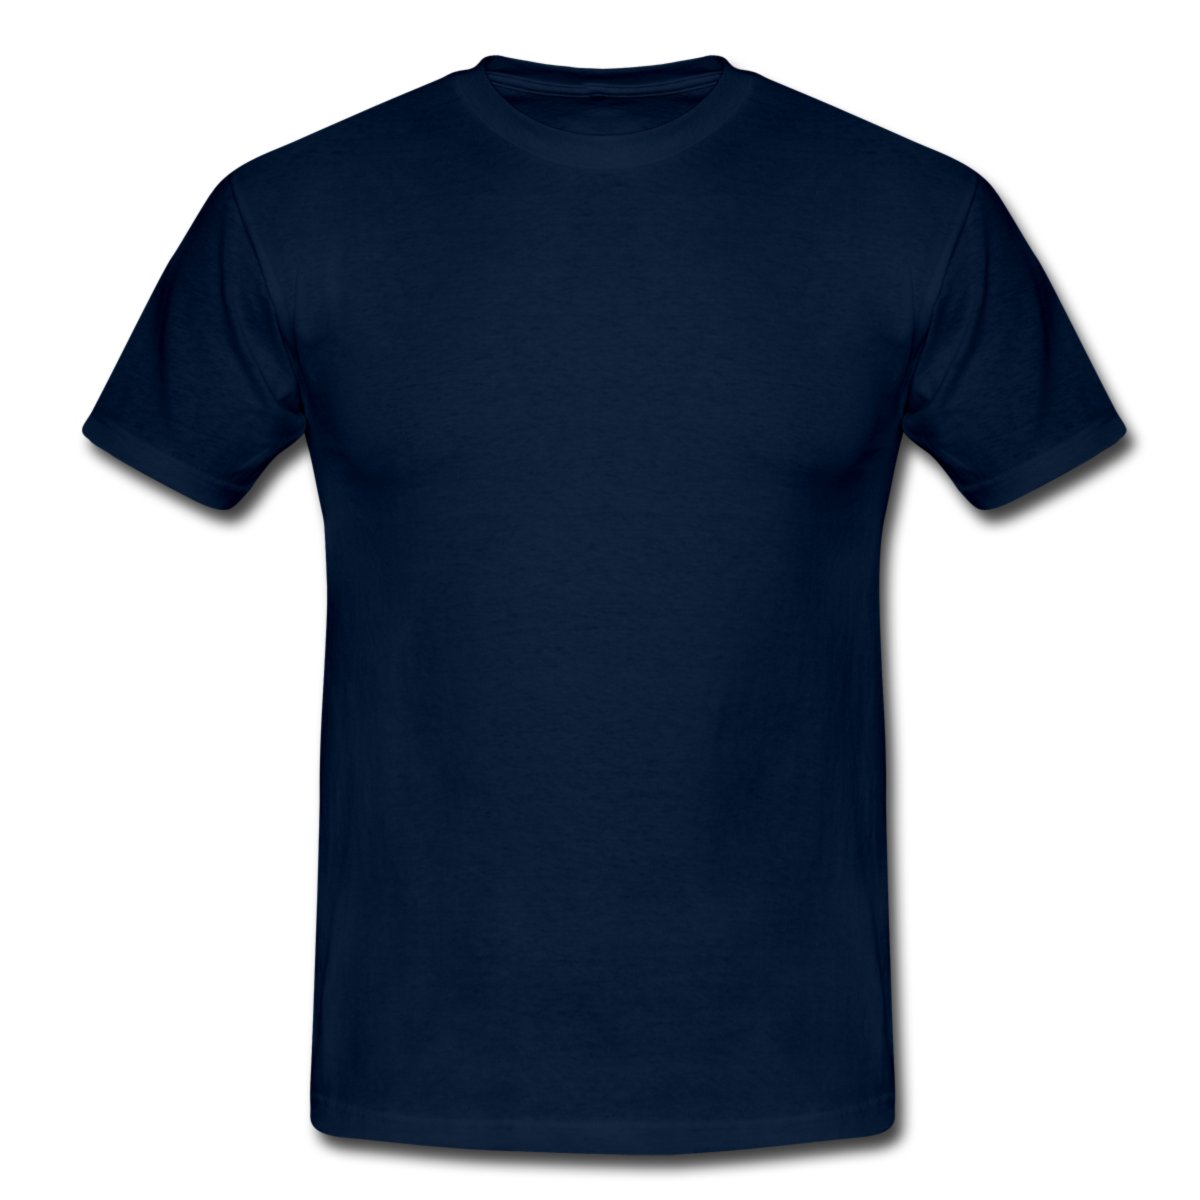 T-shirt 10 – The Most Preferred Home of 